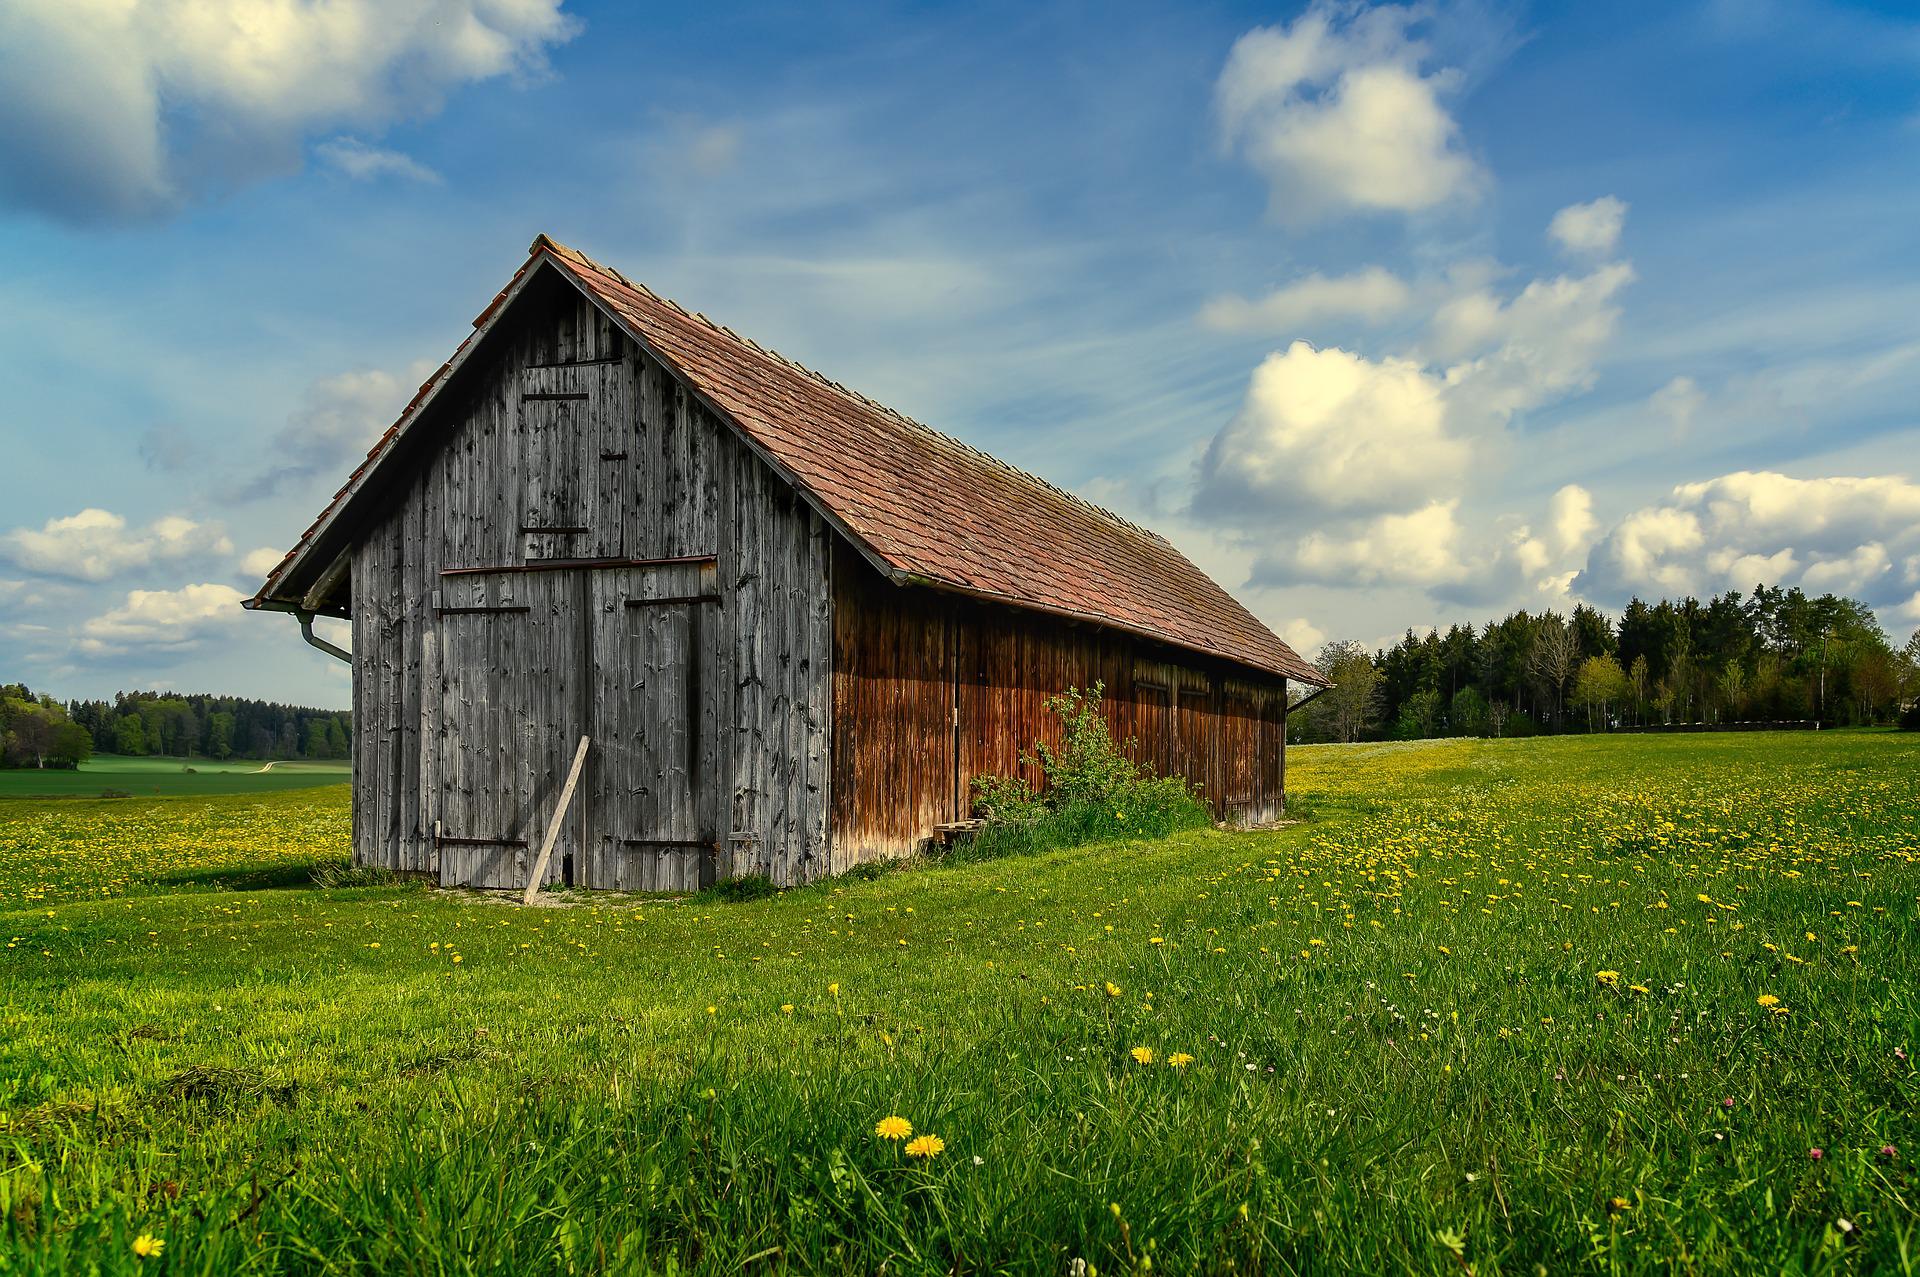 Old wood barn in a green field with flowers